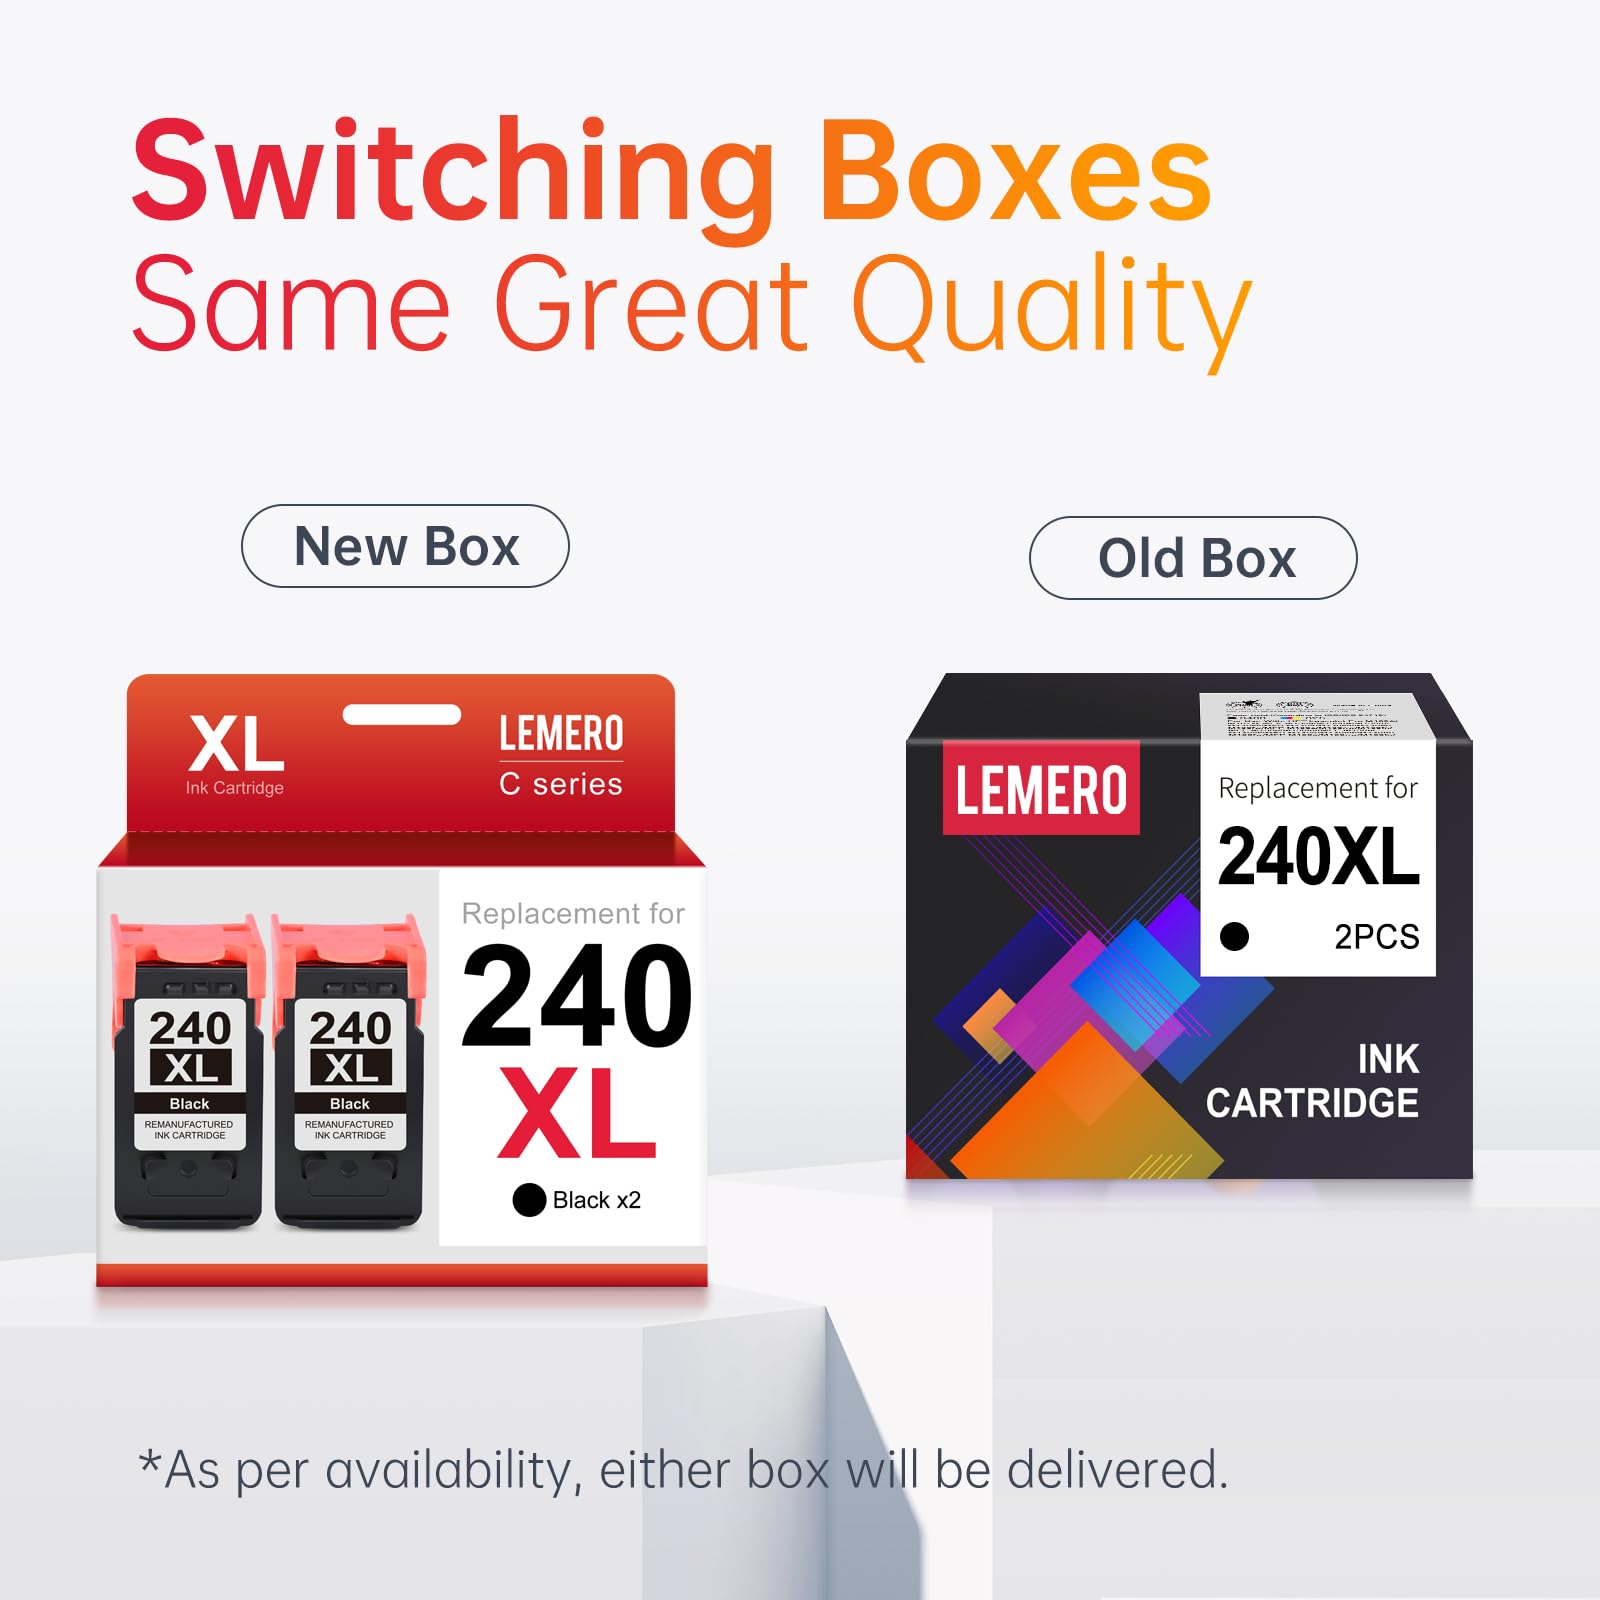 Switching Boxes, Same Great Quality" Announcement for LEMERO Ink Cartridges:LEMERO ink cartridge packaging transition from old to new design, showing two versions of the 240XL black ink cartridge, highlighting continuity in quality despite the box change.